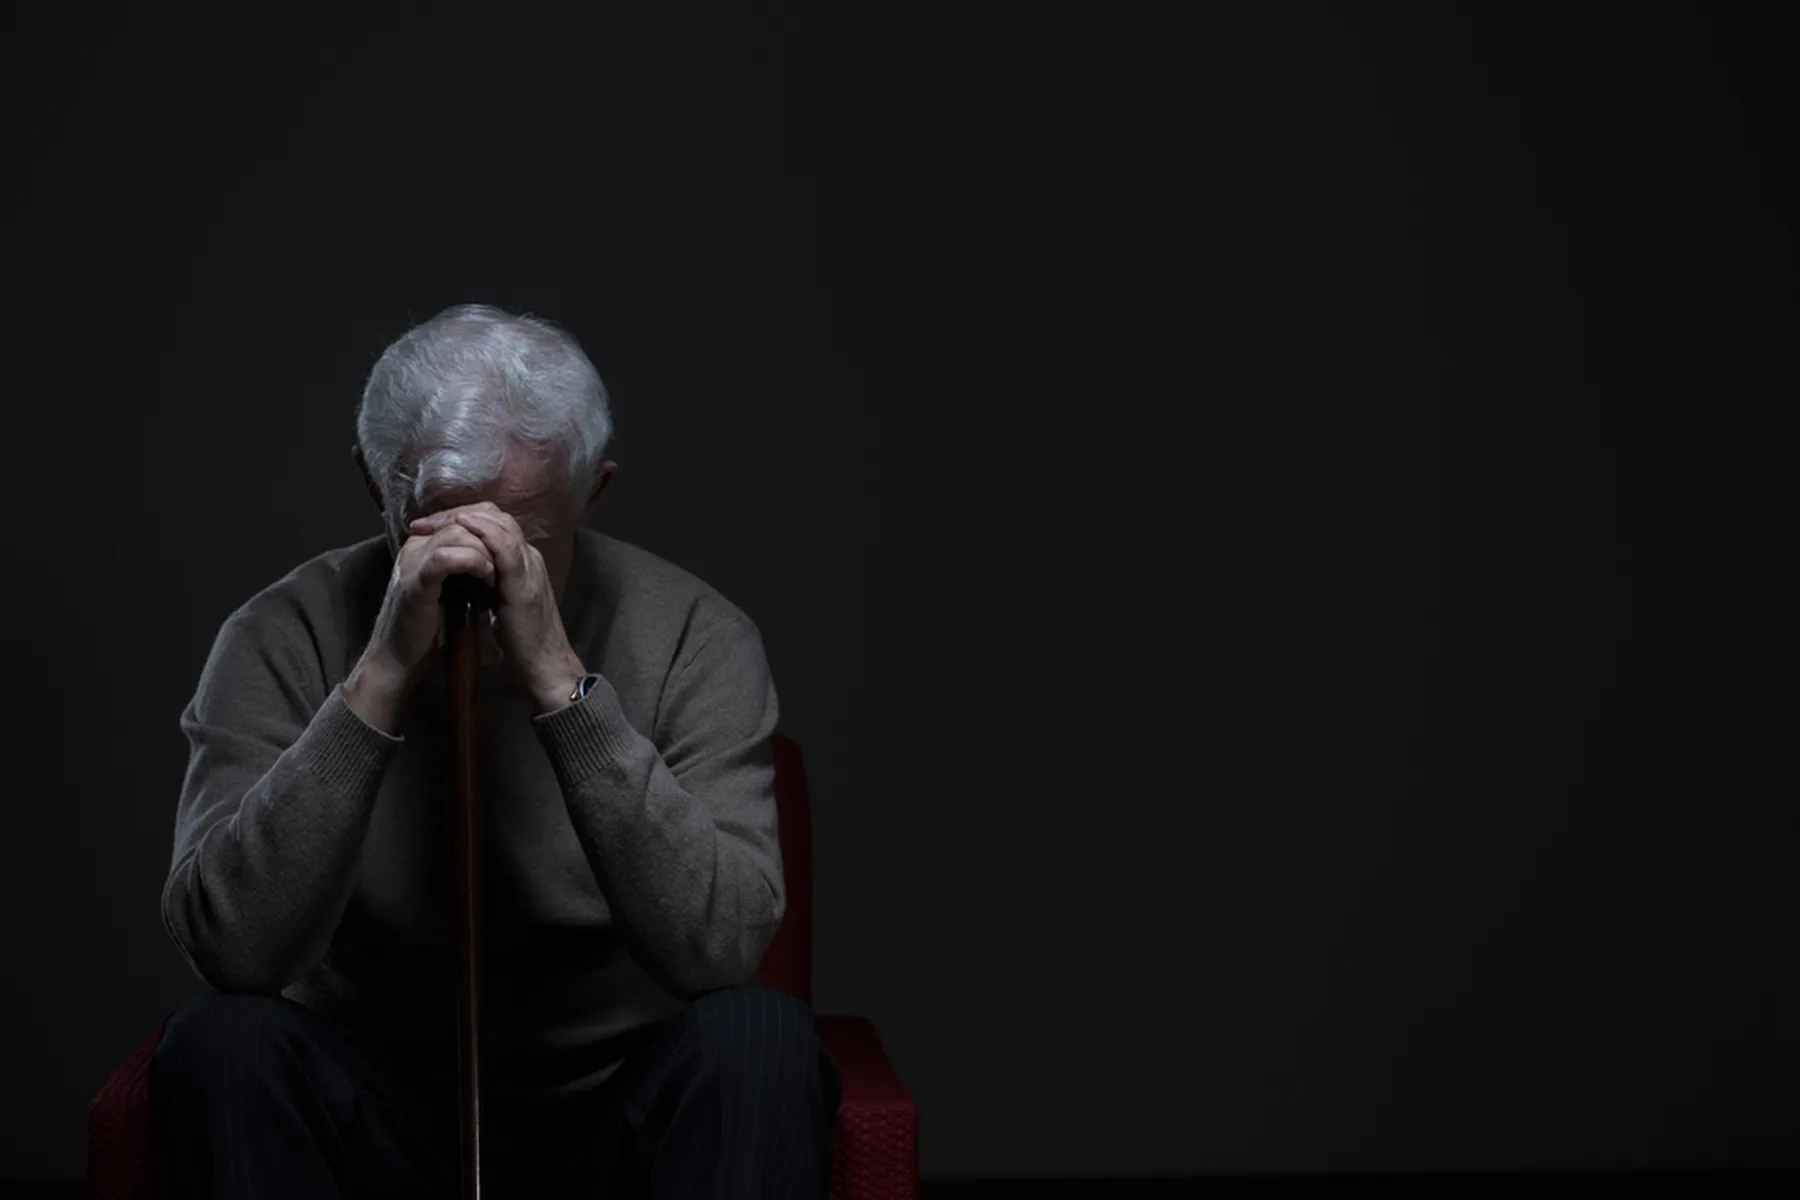 An older man holds his head to his cane as he sits in a dark room.